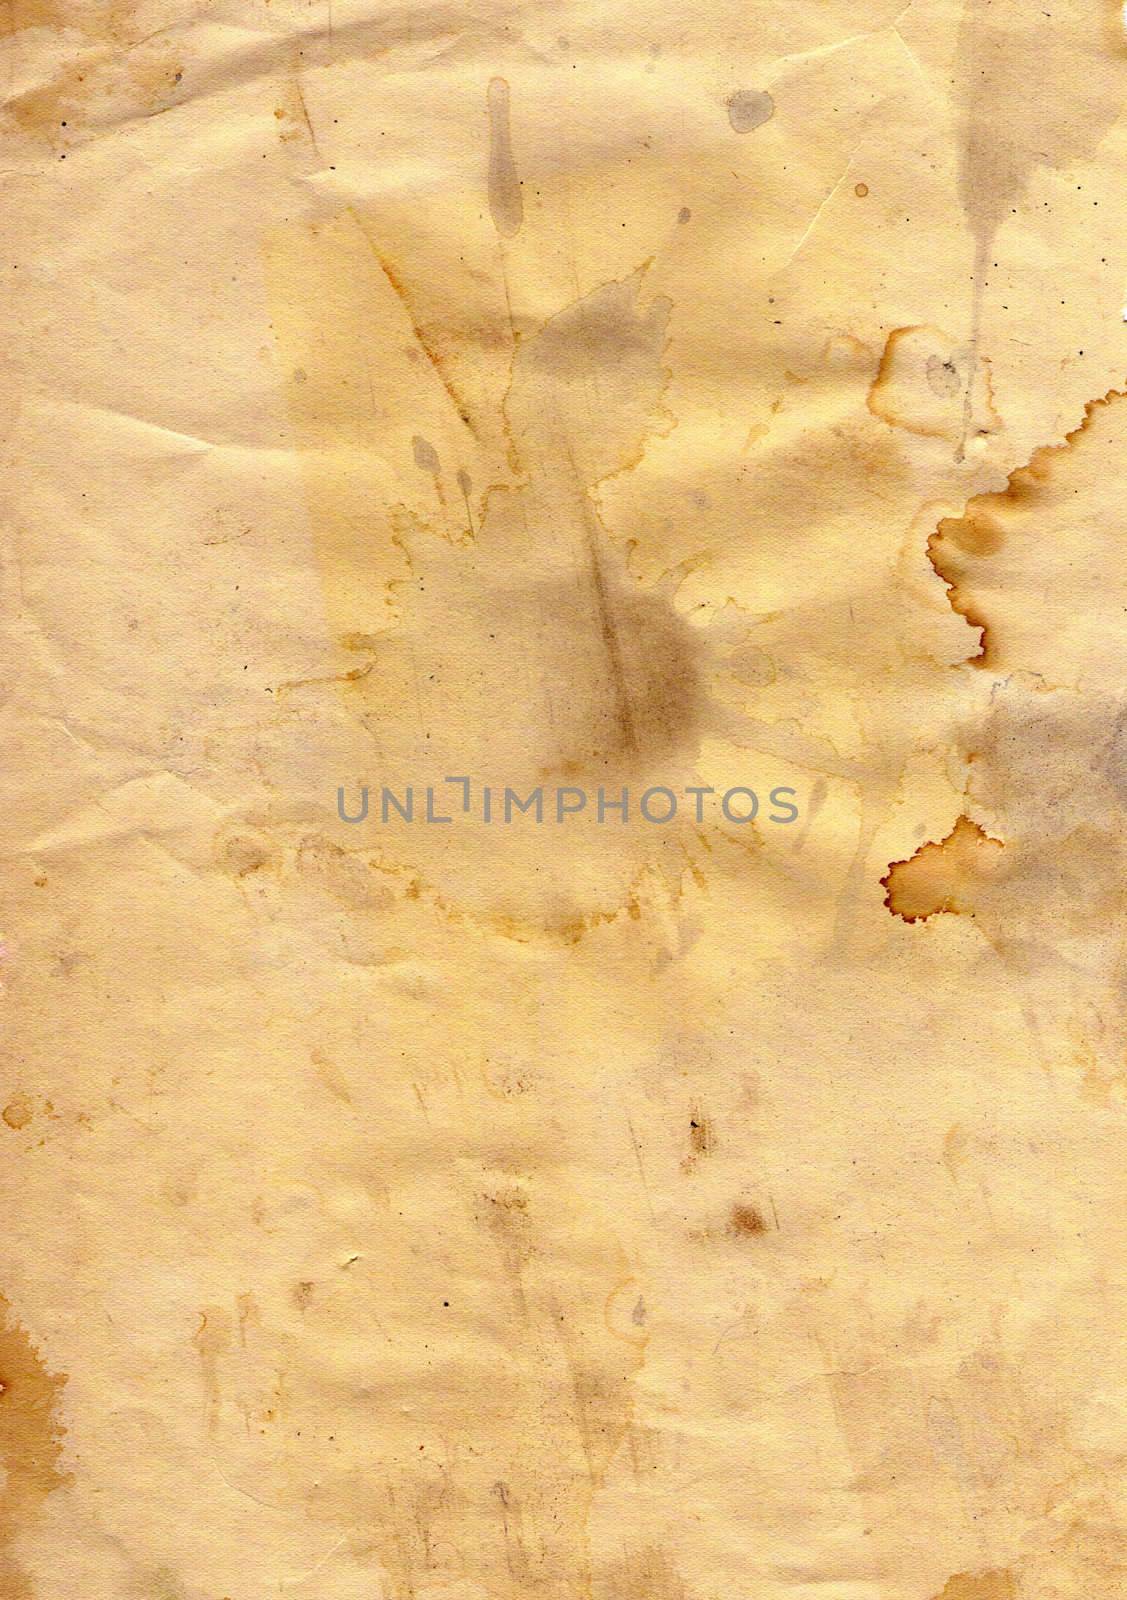 Old grunge paper with blobs - abstract background